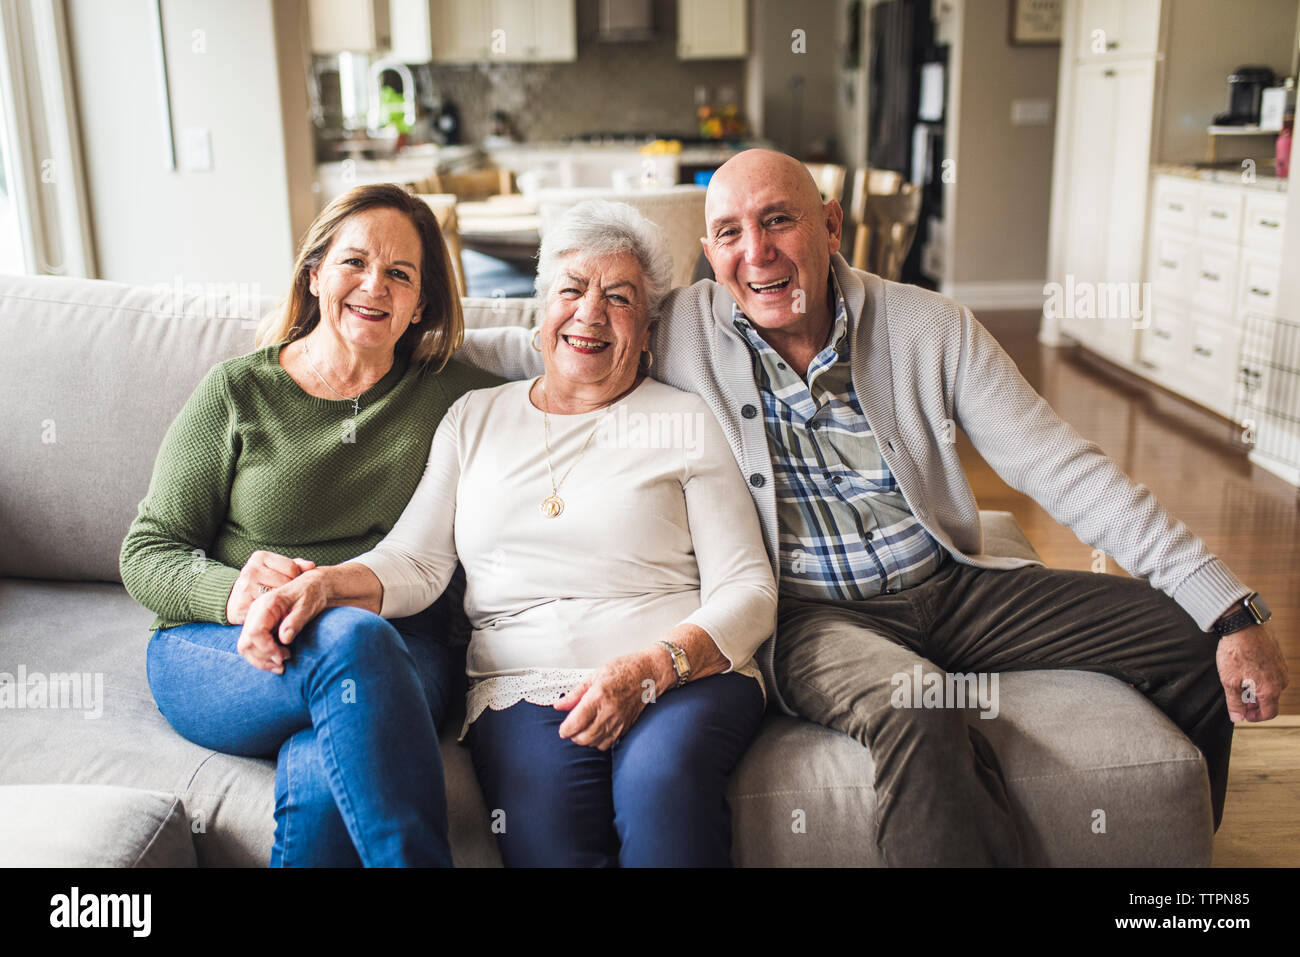 Portrait of multigenerational family sitting on living room couch Stock Photo